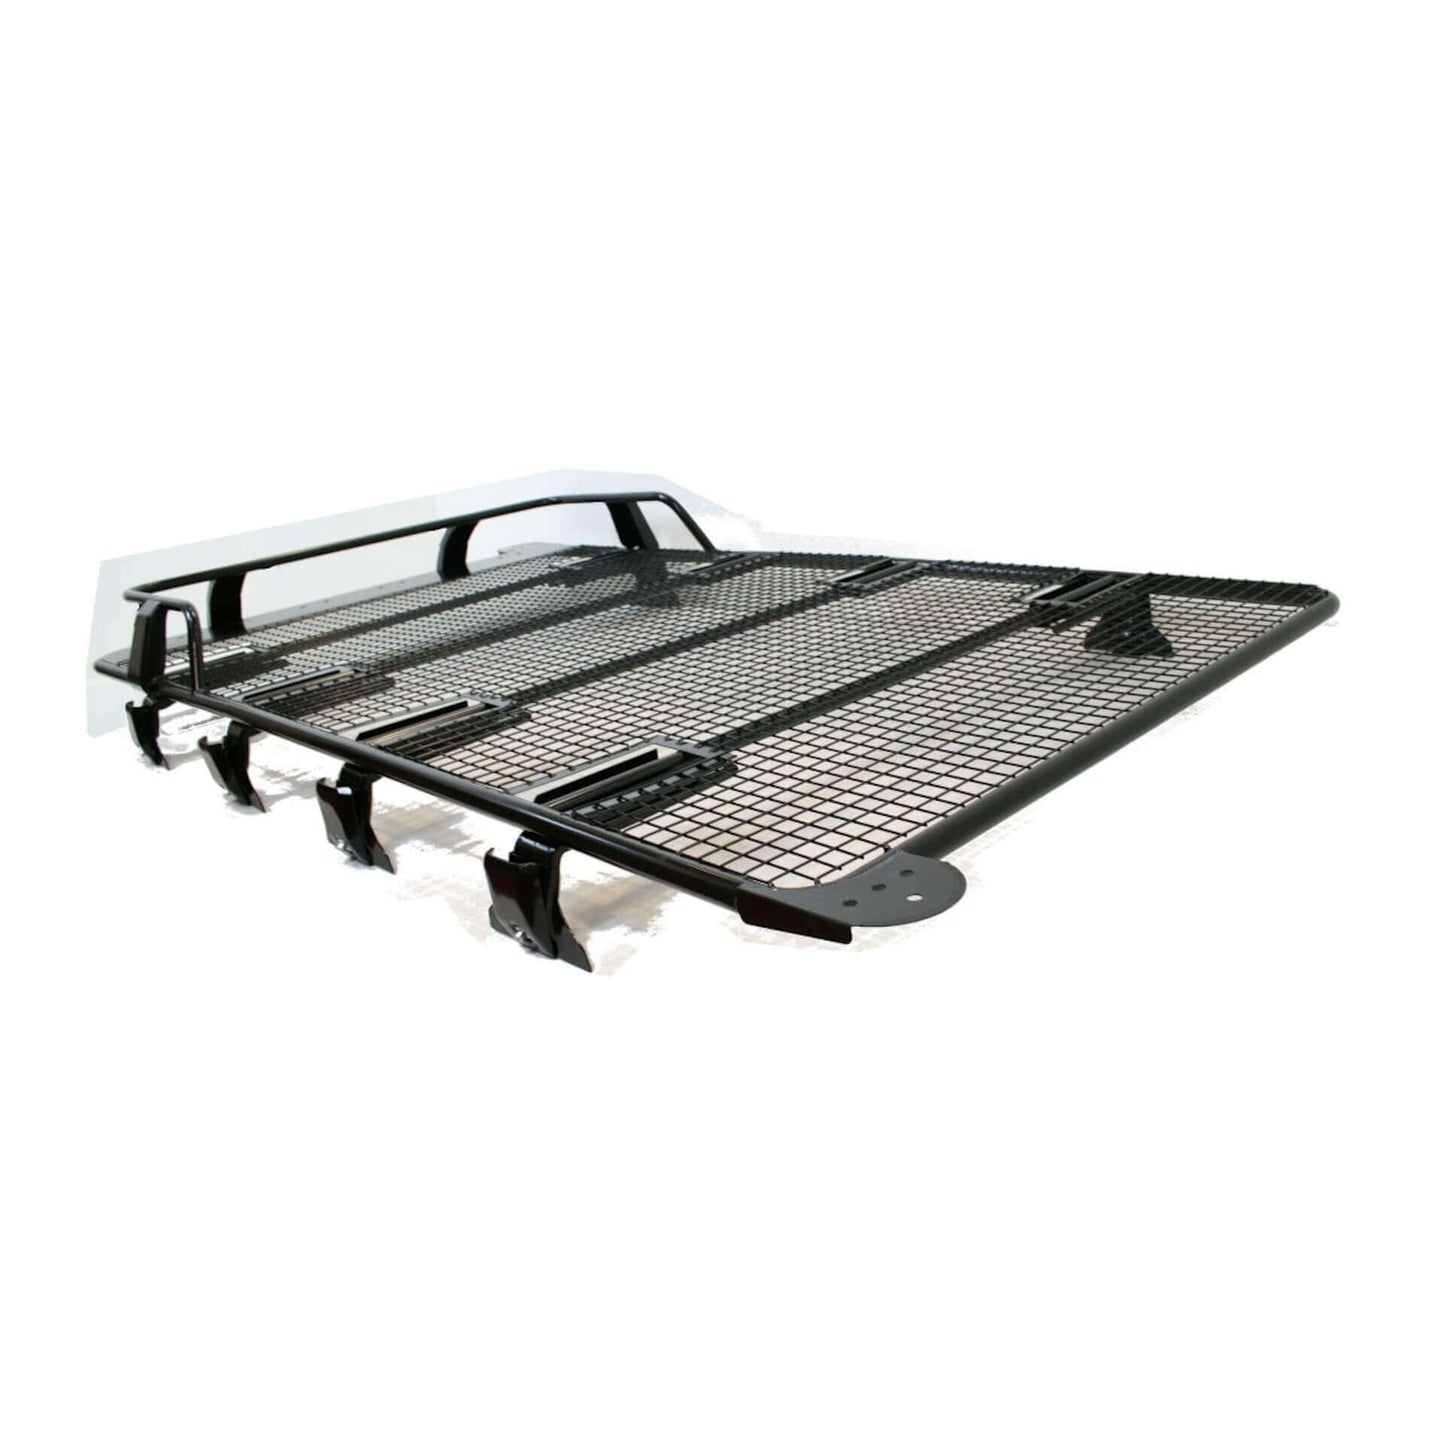 Expedition Steel Front Basket Roof Rack for Toyota Land Cruiser Colorado 95-02